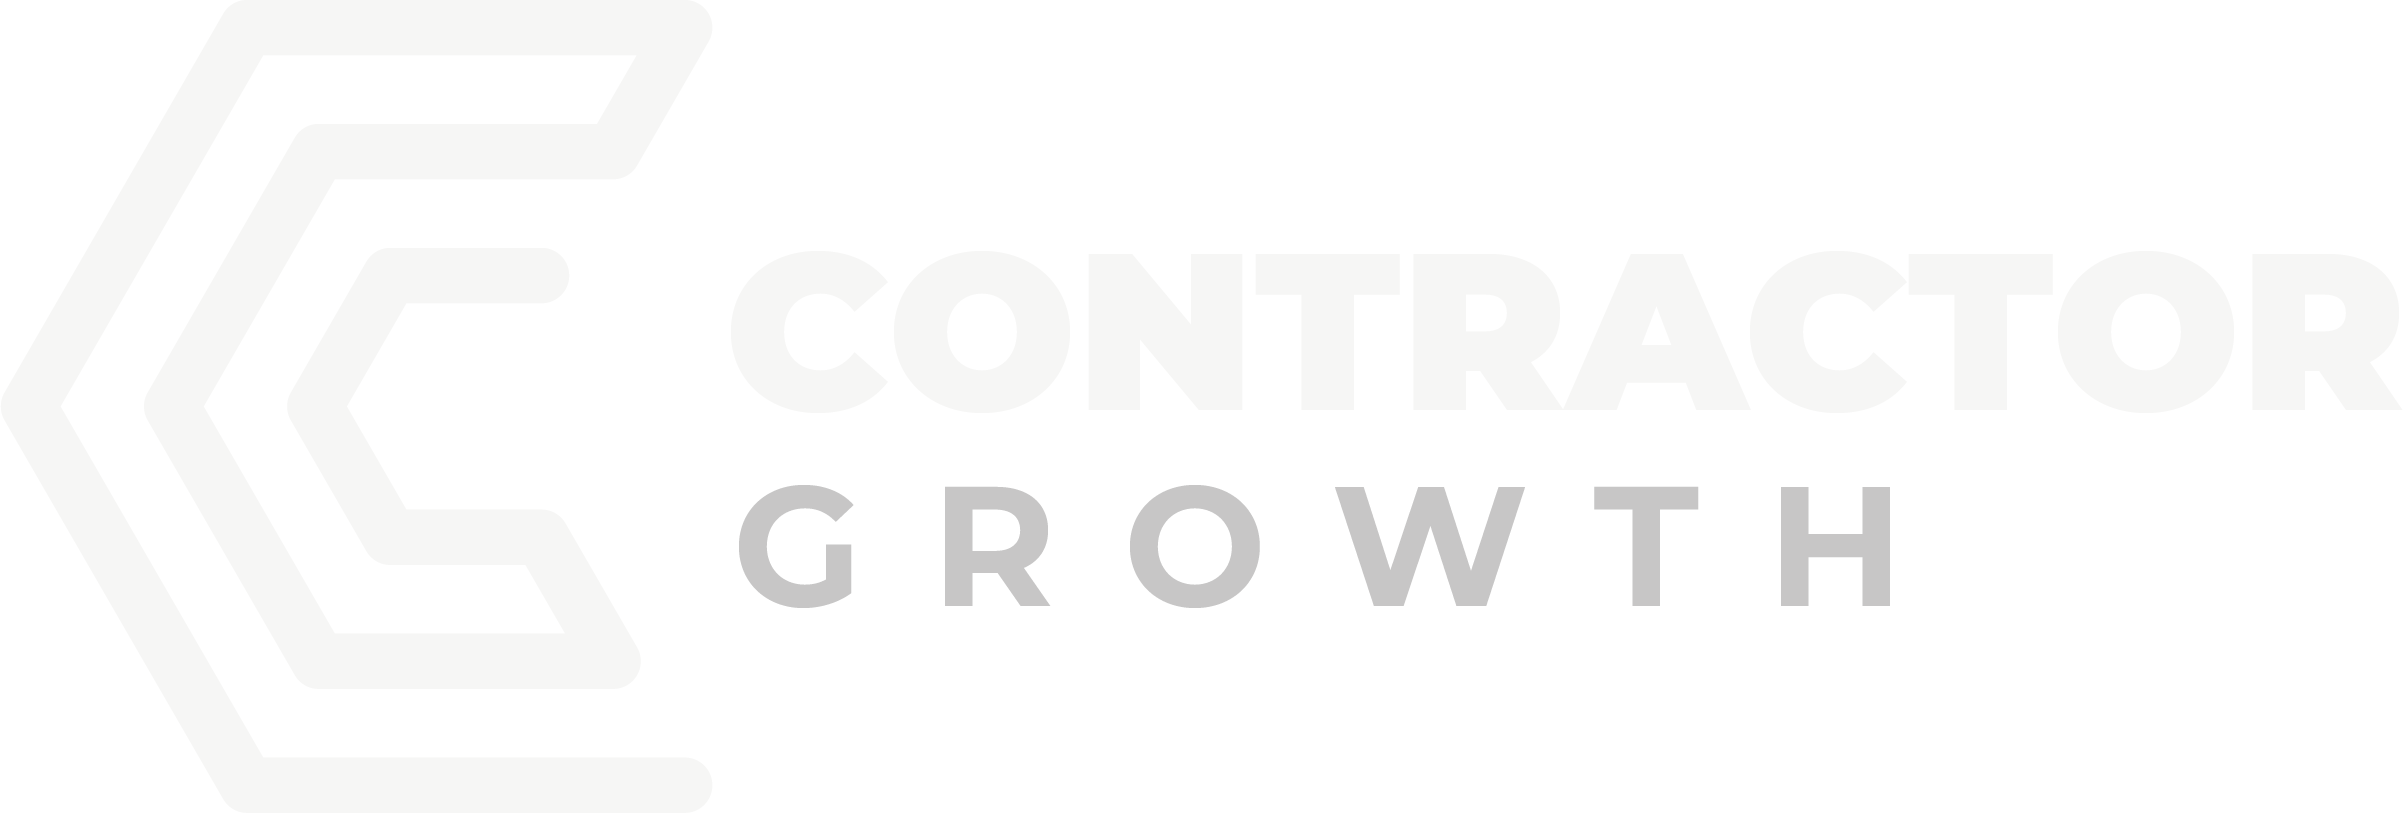 Contractor Growth